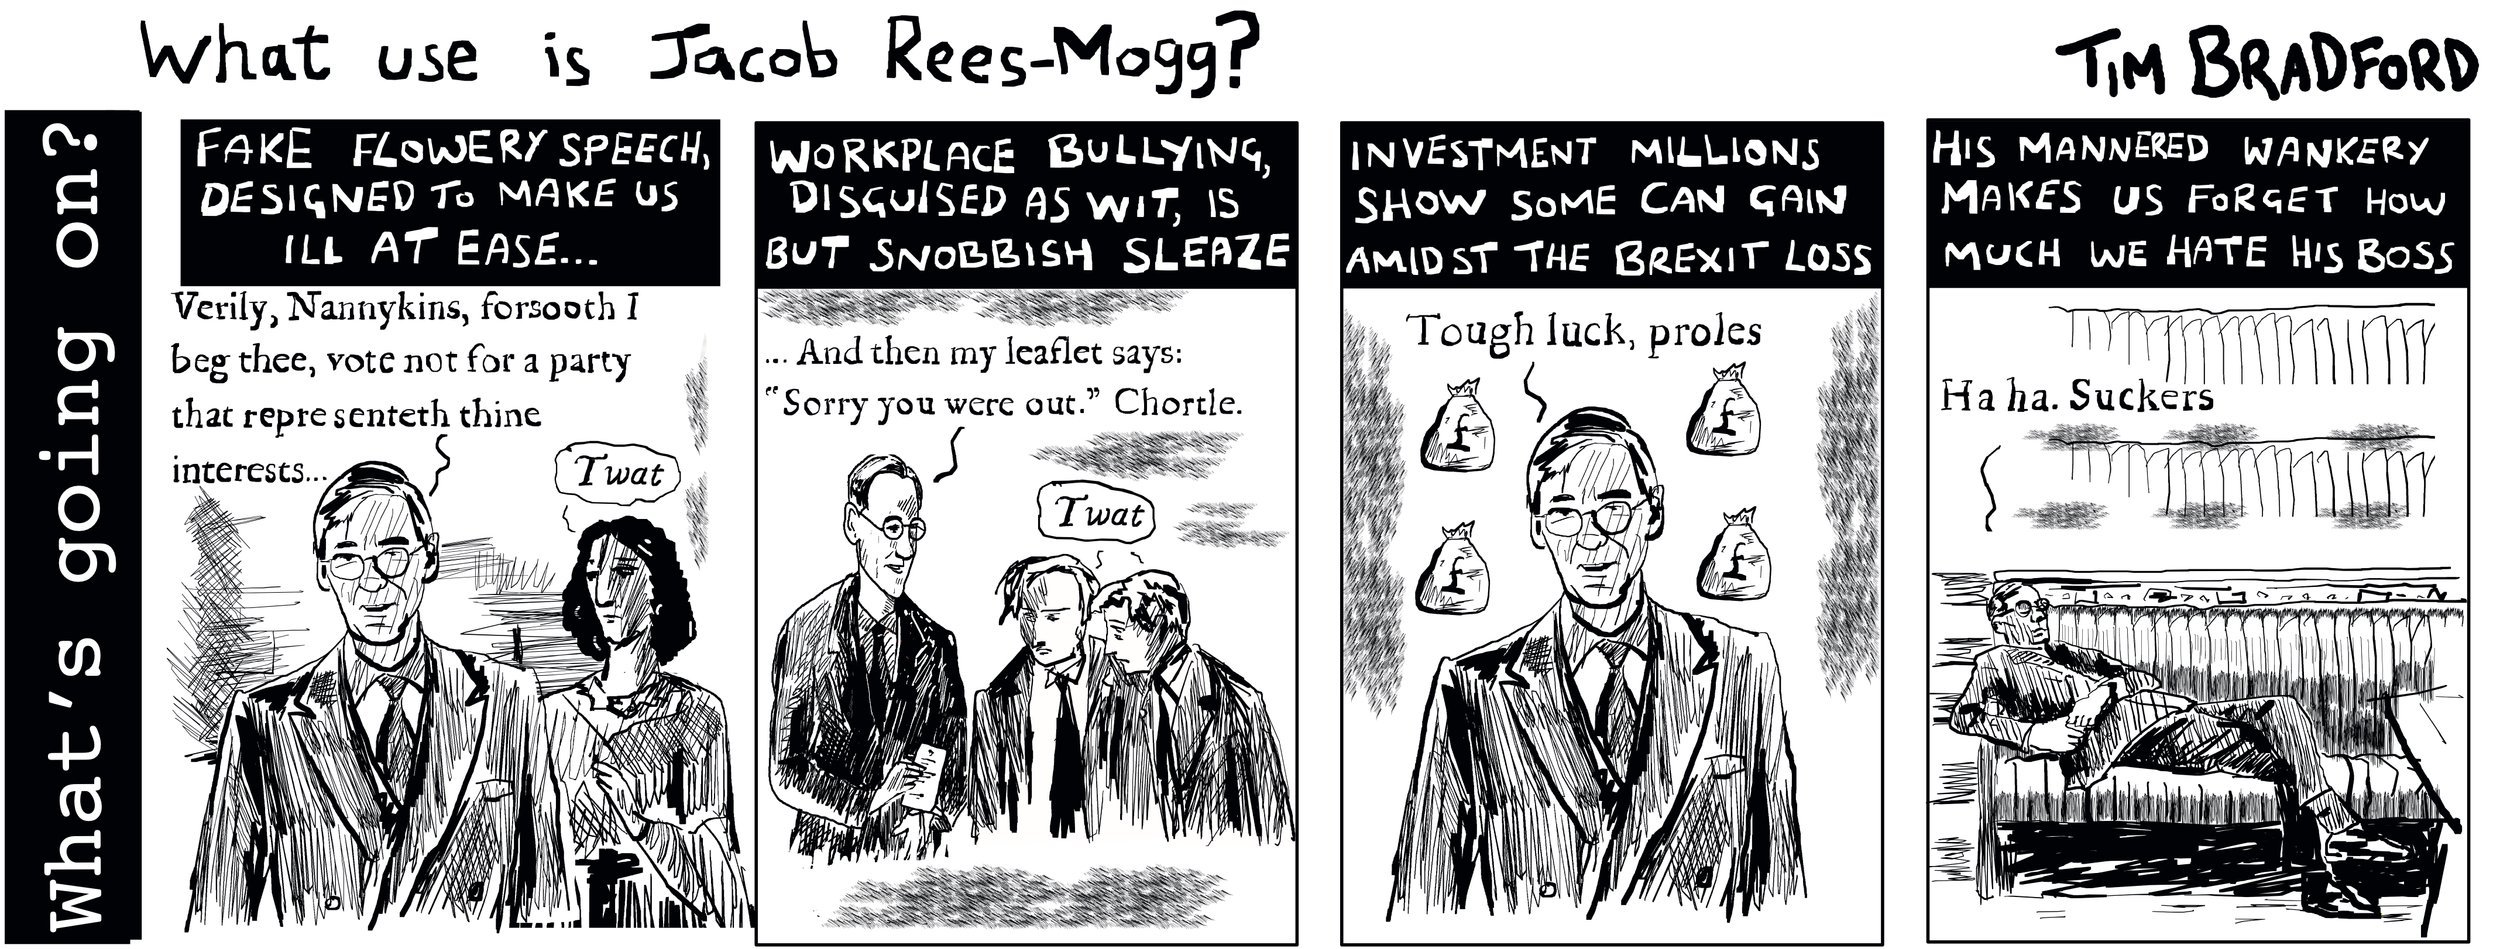 What use is Jacob Rees-Mogg? - 02/05/2022